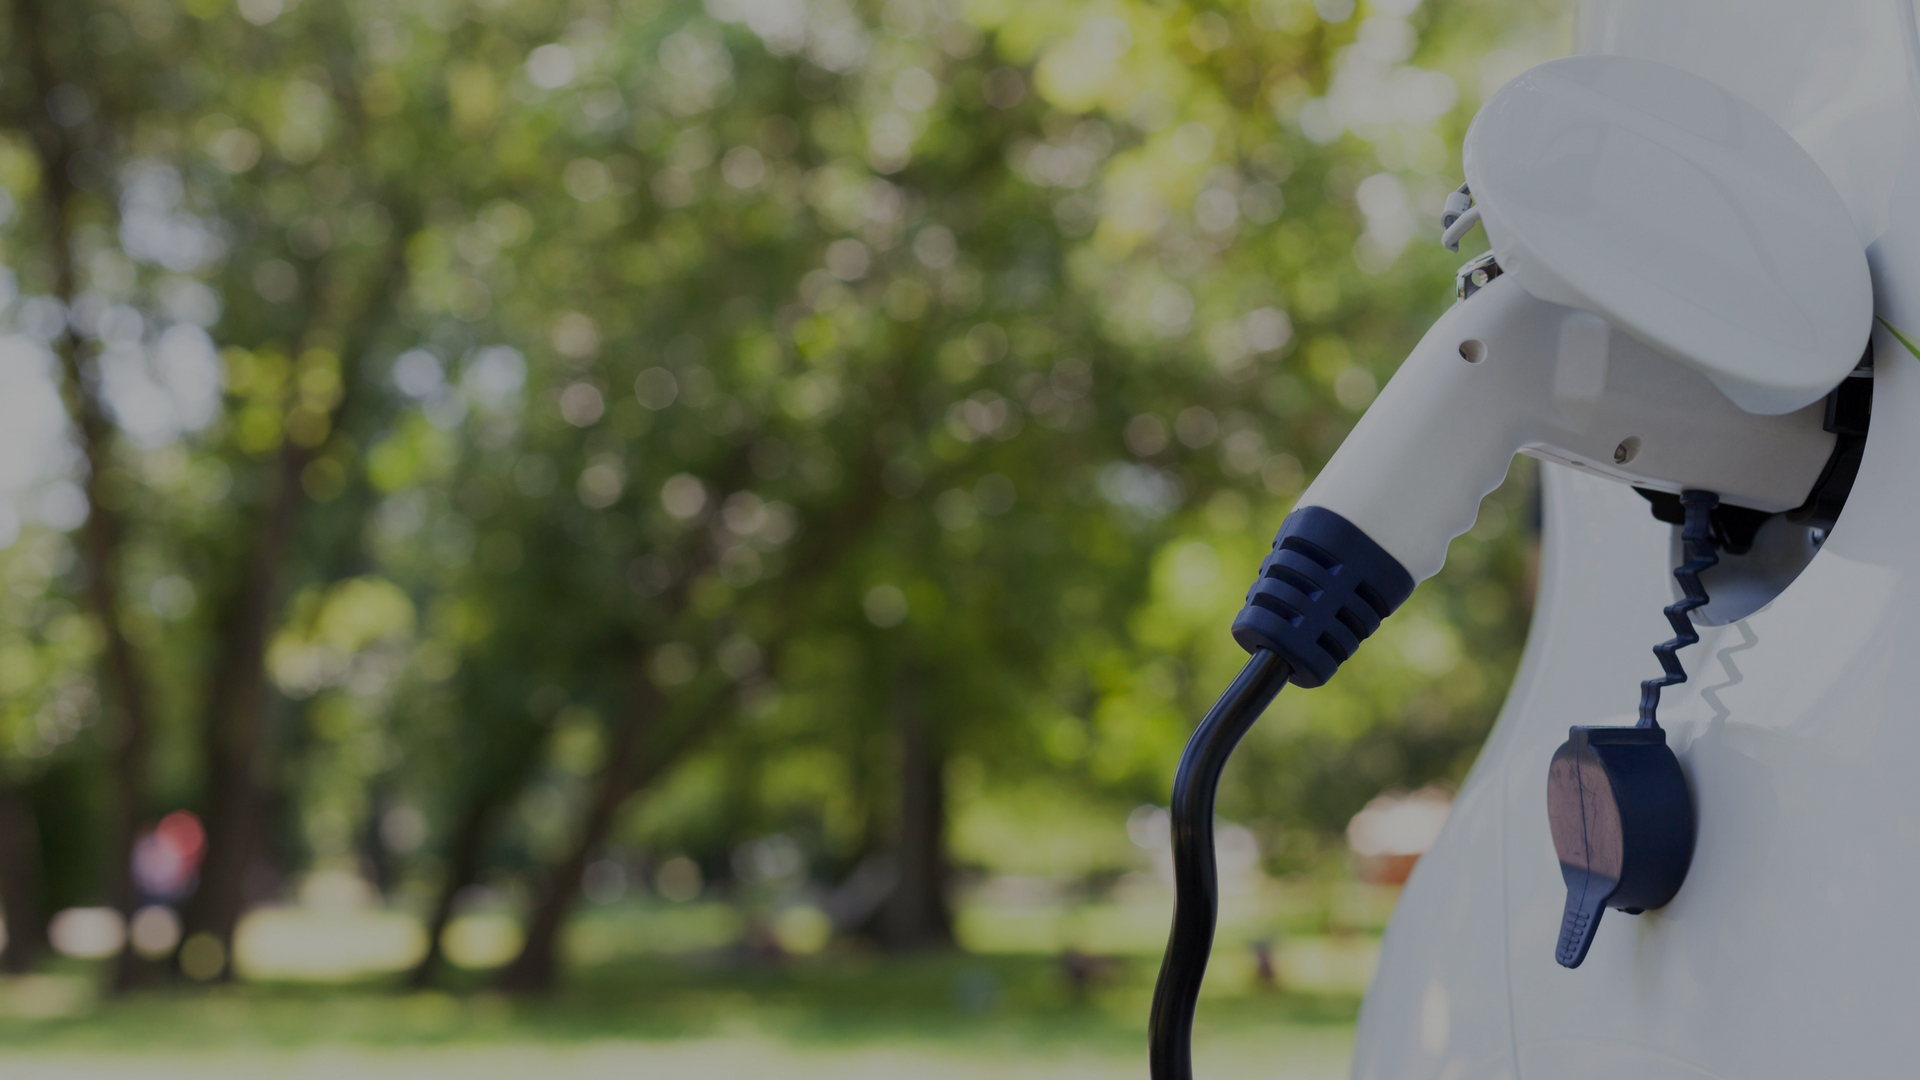 electric vehicle charging solutions